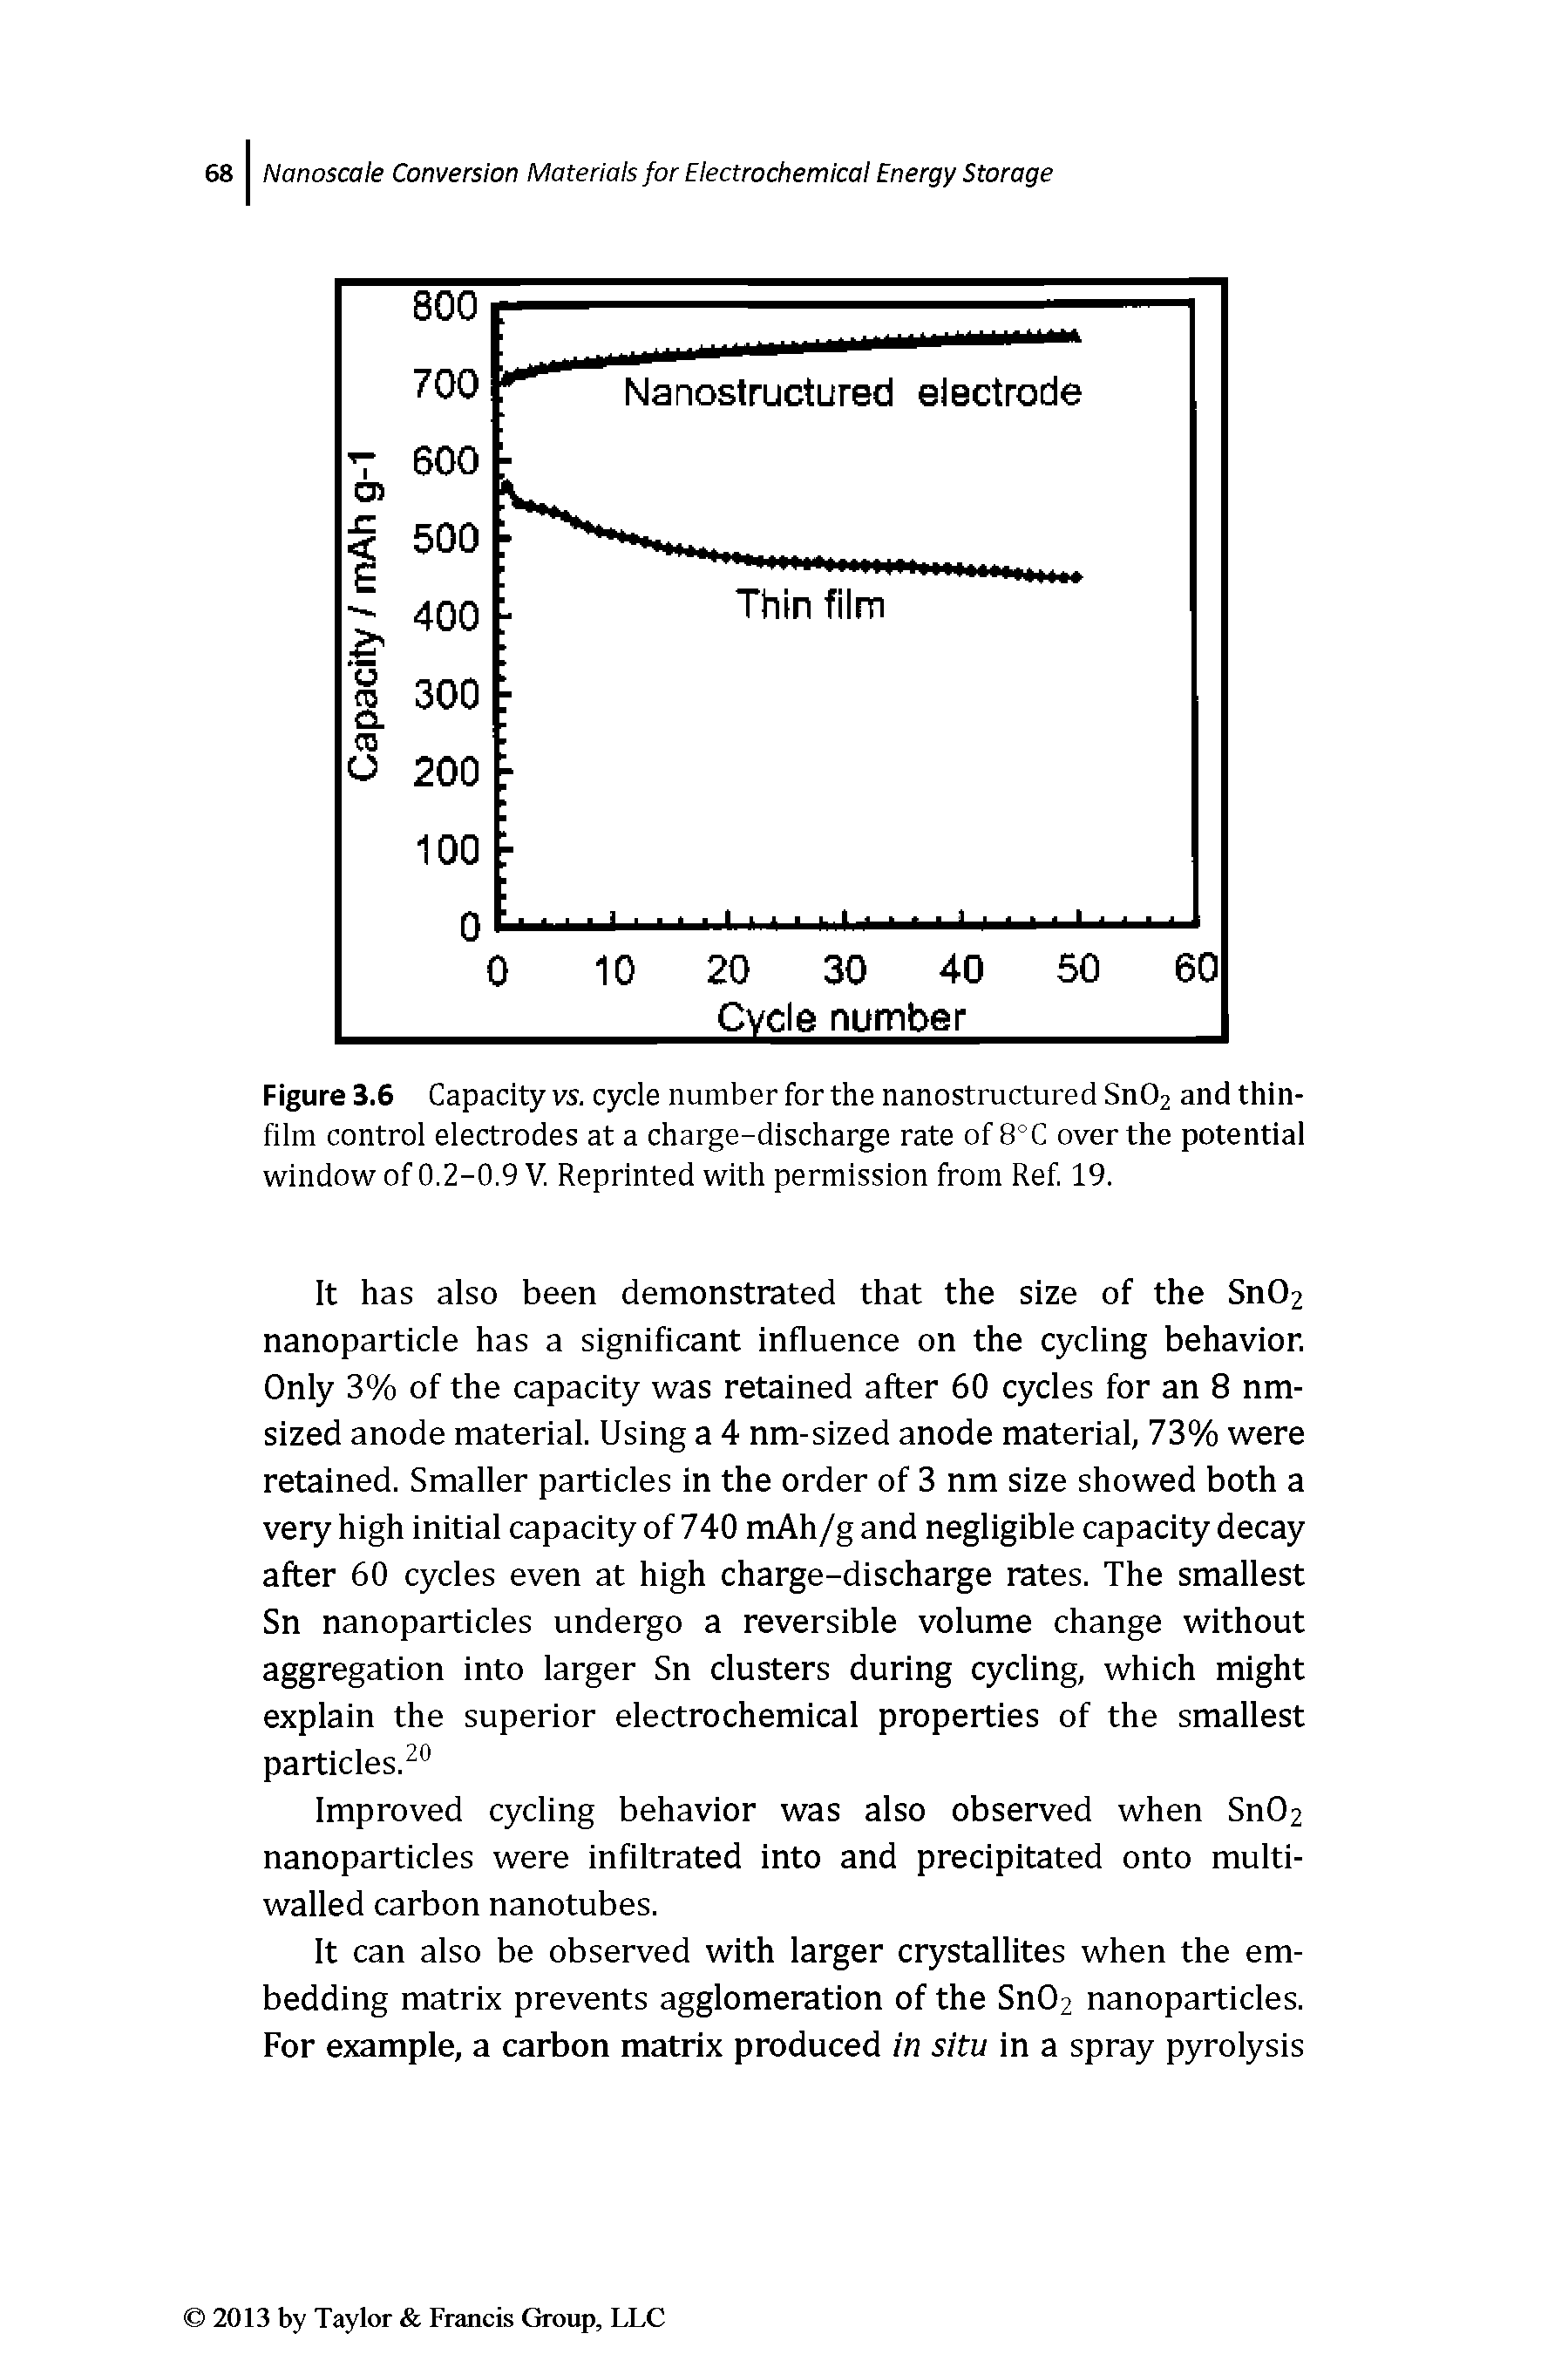 Figure 3.6 Capacity vs. cycle number for the nanostructured Sn02 and thin-film control electrodes at a charge-discharge rate of 8°C over the potential window of 0.2-0.9 V. Reprinted with permission from Ref. 19.